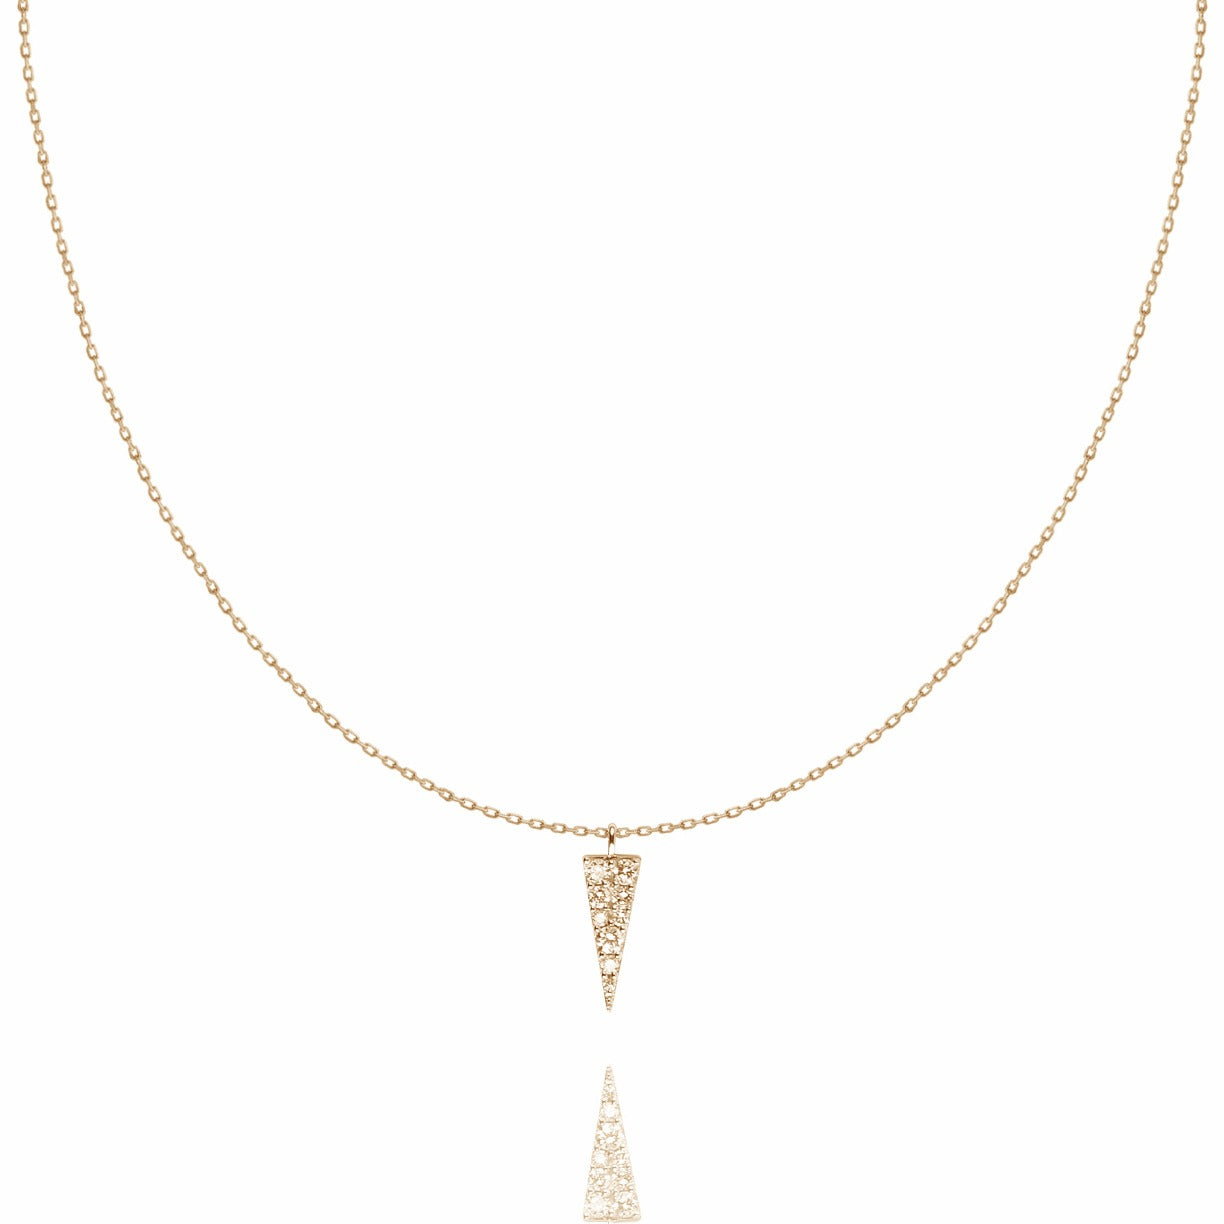 Yellow gold spike necklace